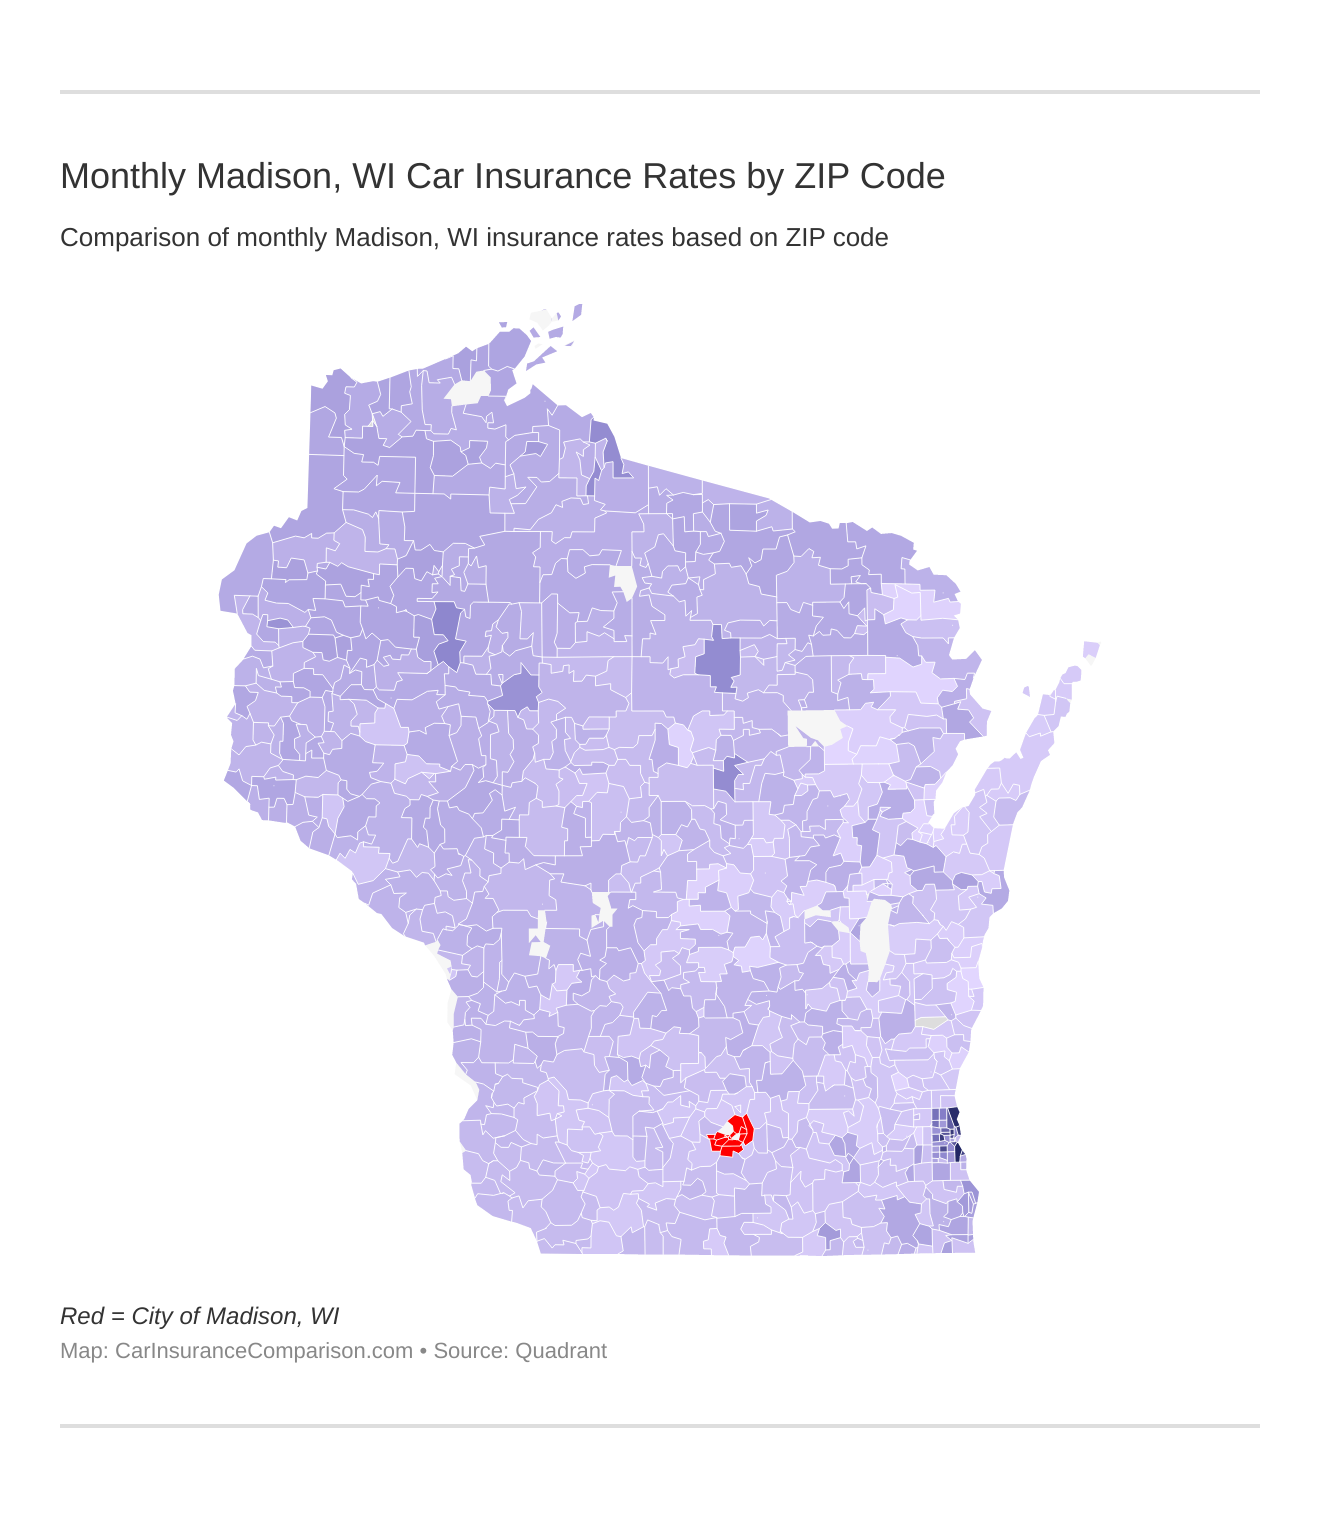 Monthly Madison, WI Car Insurance Rates by ZIP Code